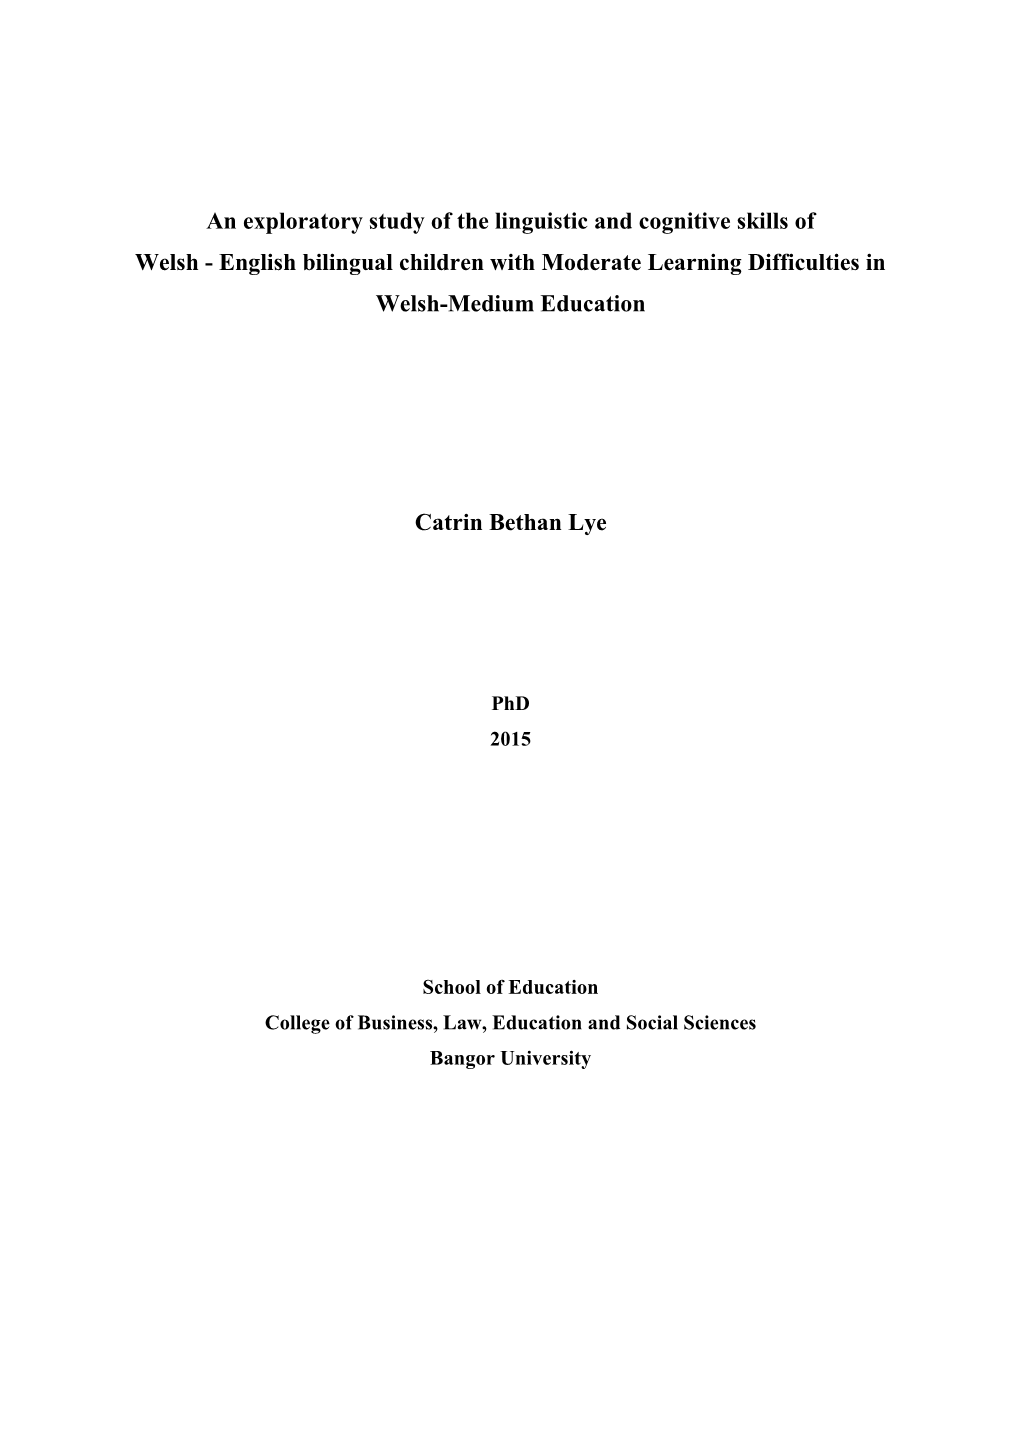 An Exploratory Study of the Linguistic and Cognitive Skills of Welsh - English Bilingual Children with Moderate Learning Difficulties in Welsh-Medium Education